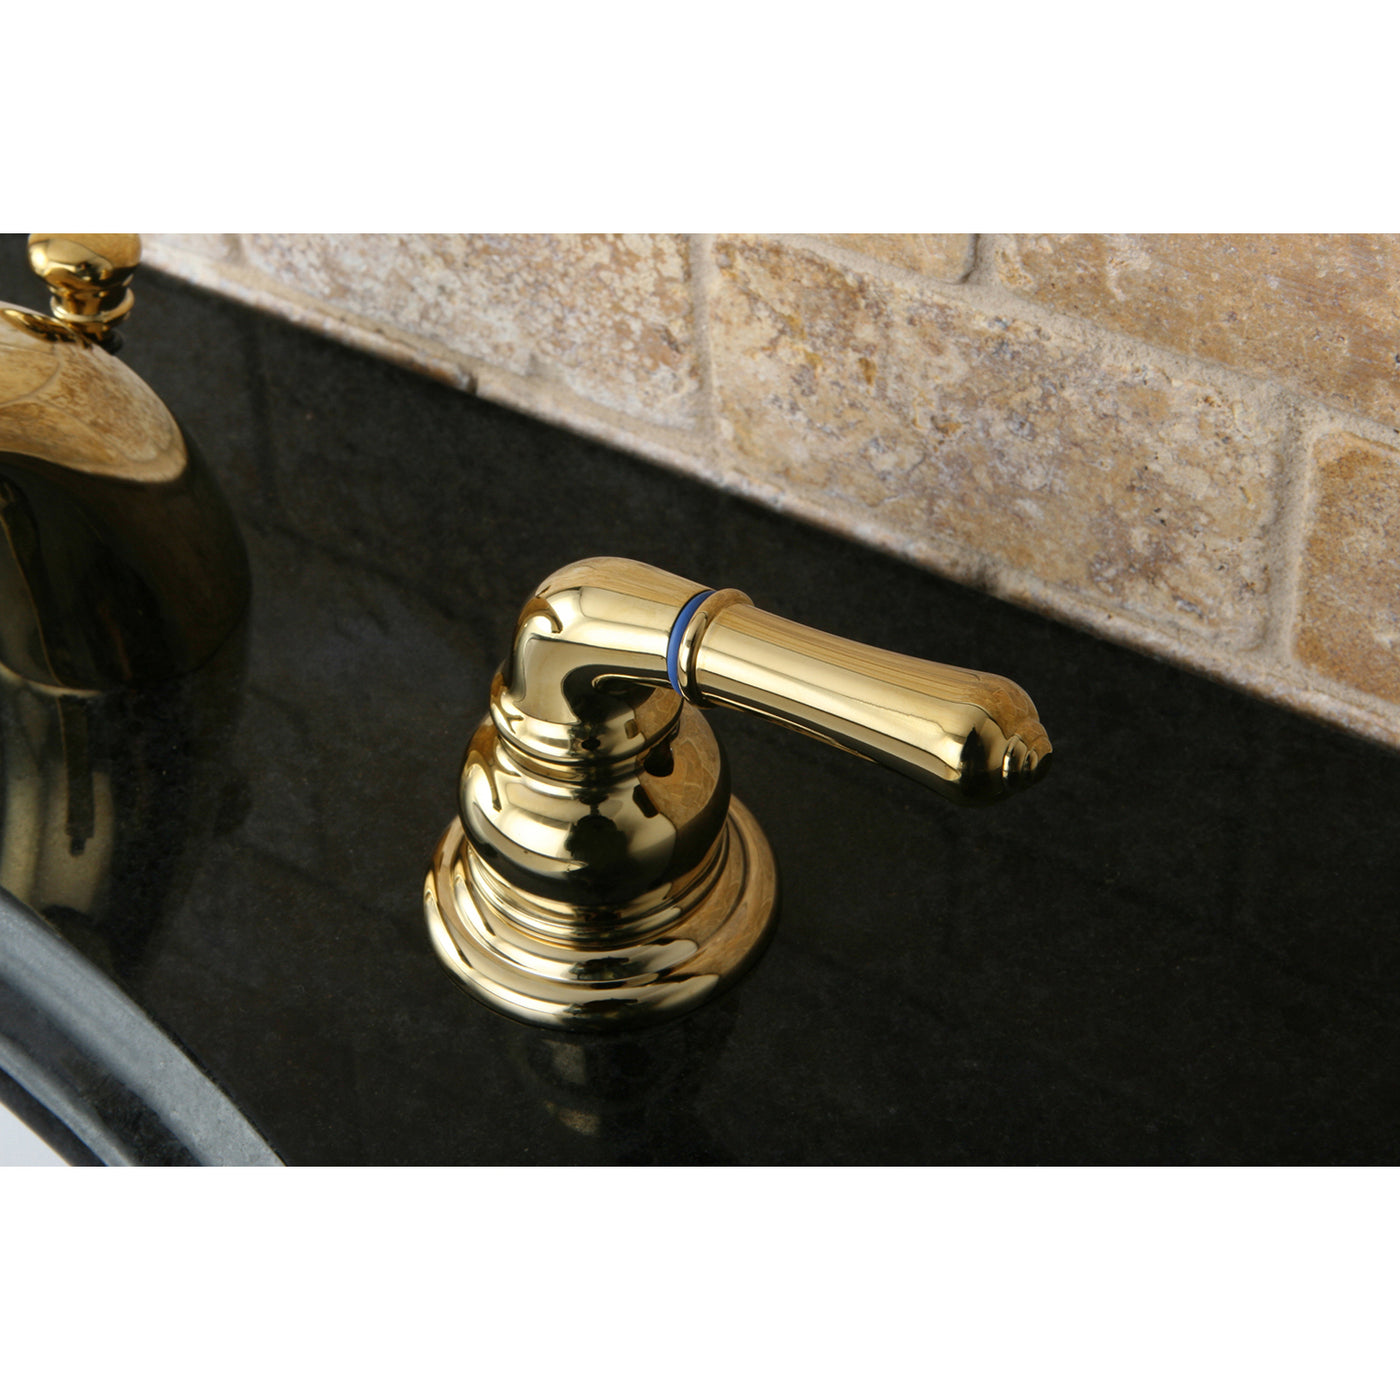 Elements of Design EB952 Mini-Widespread Bathroom Faucet, Polished Brass